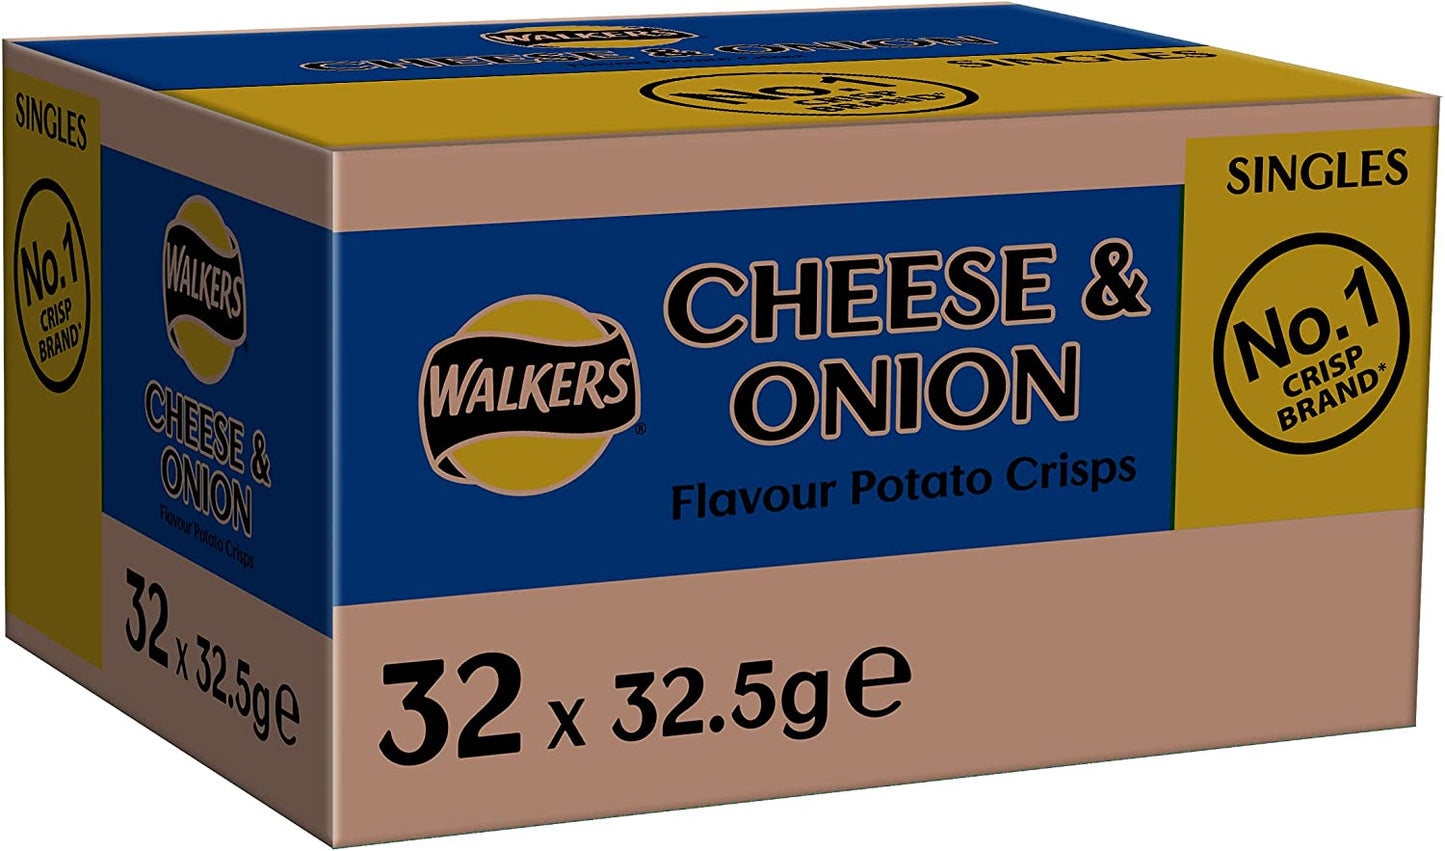 Walkers Crisps Cheese & Onion Pack 32's